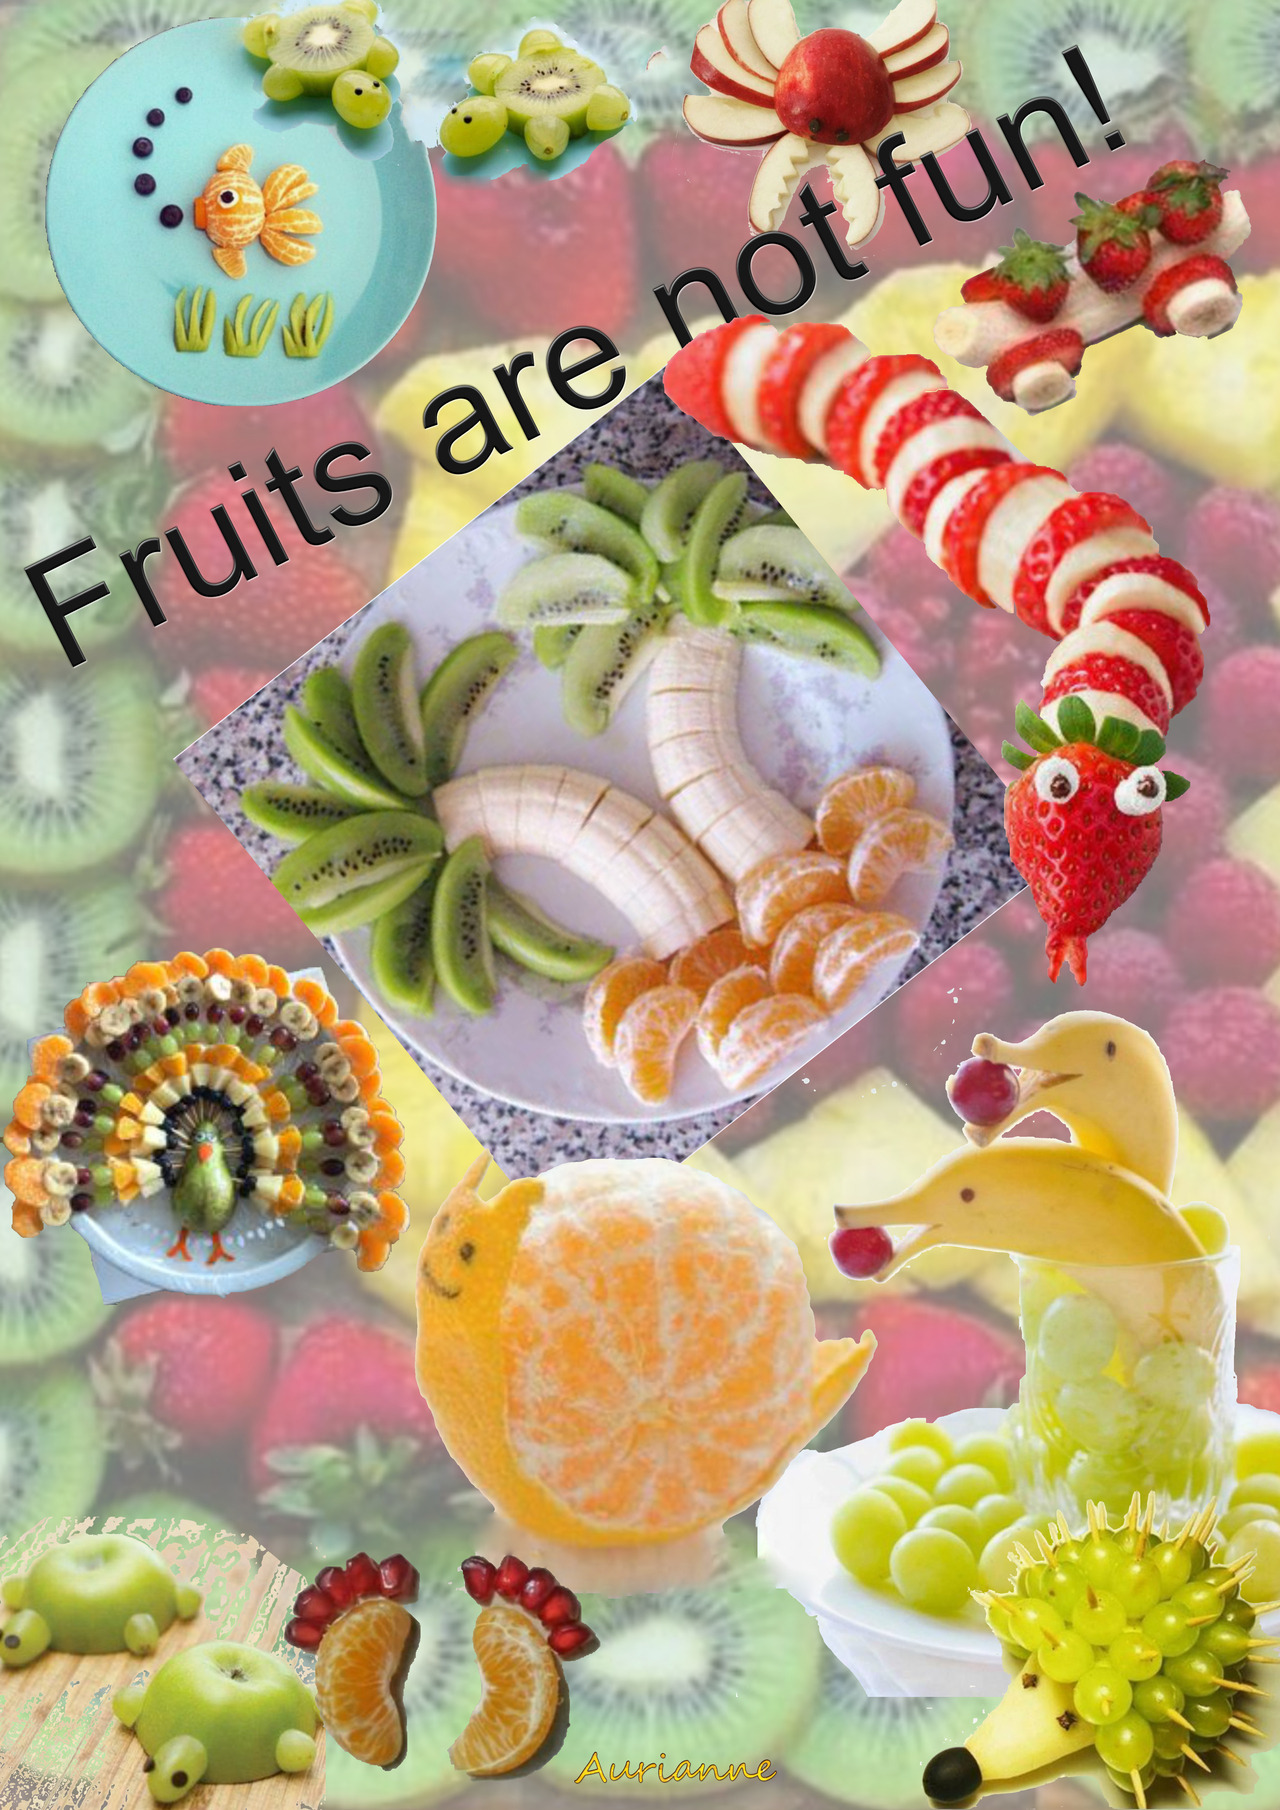 Fruits are not fun !